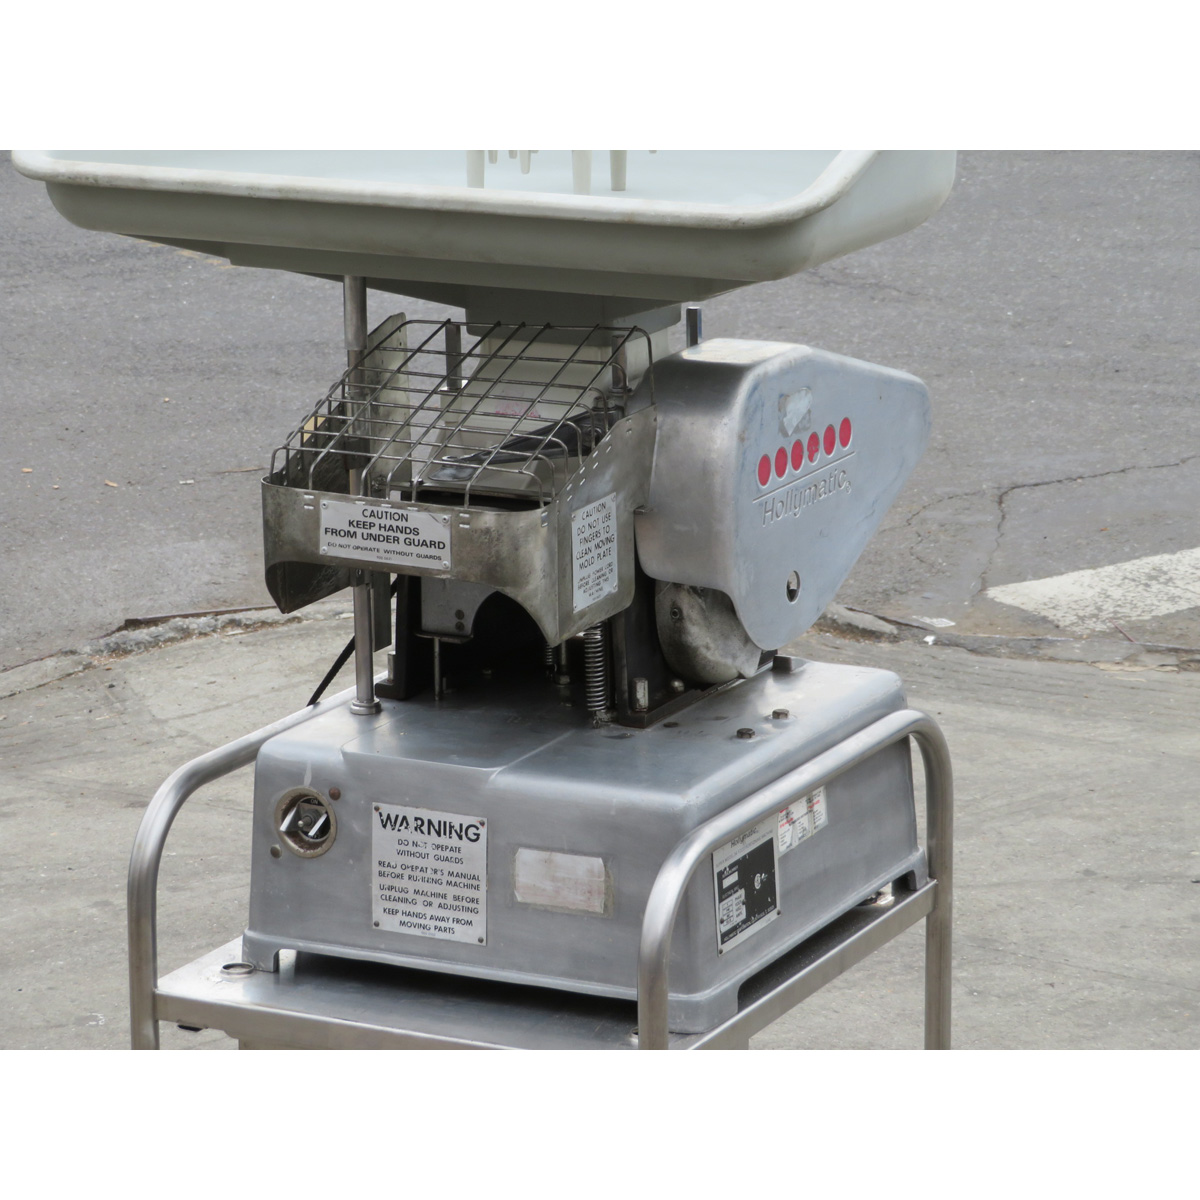 Hollymatic SUPER-54 Patty Maker, Used Excellent Condition image 1